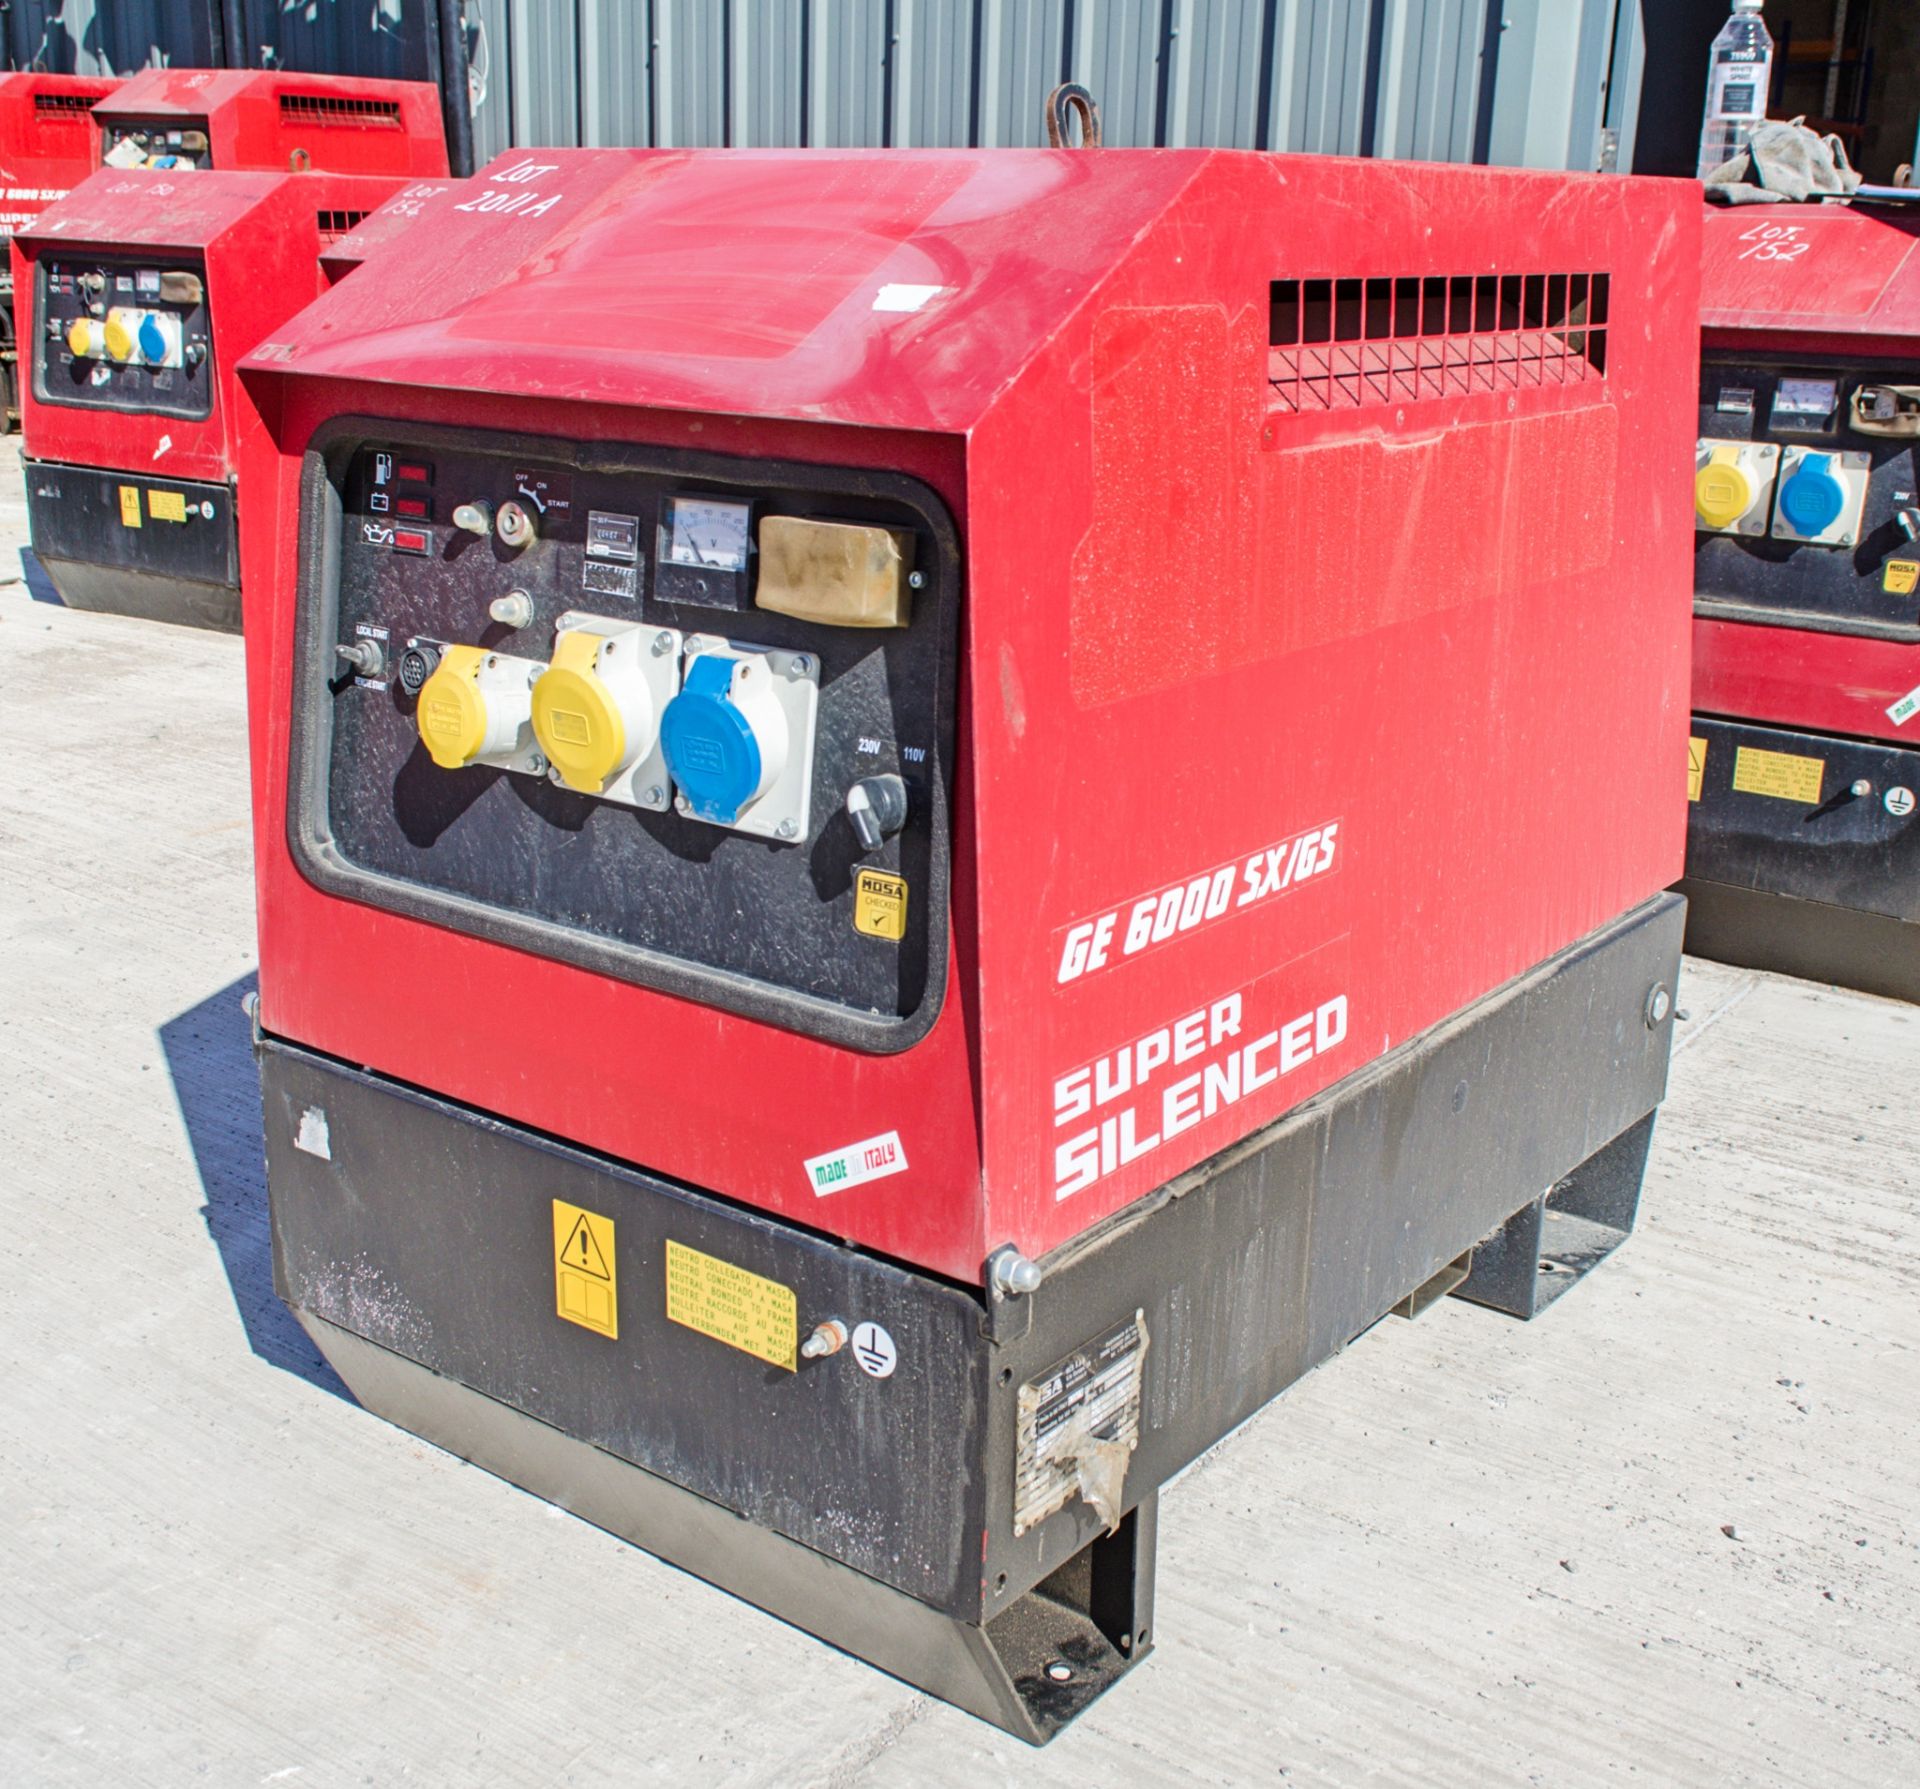 Mosa GE6000 SX/GS diesel driven generator Year: 2013 S/N: 044587 Recorded Hours: 485